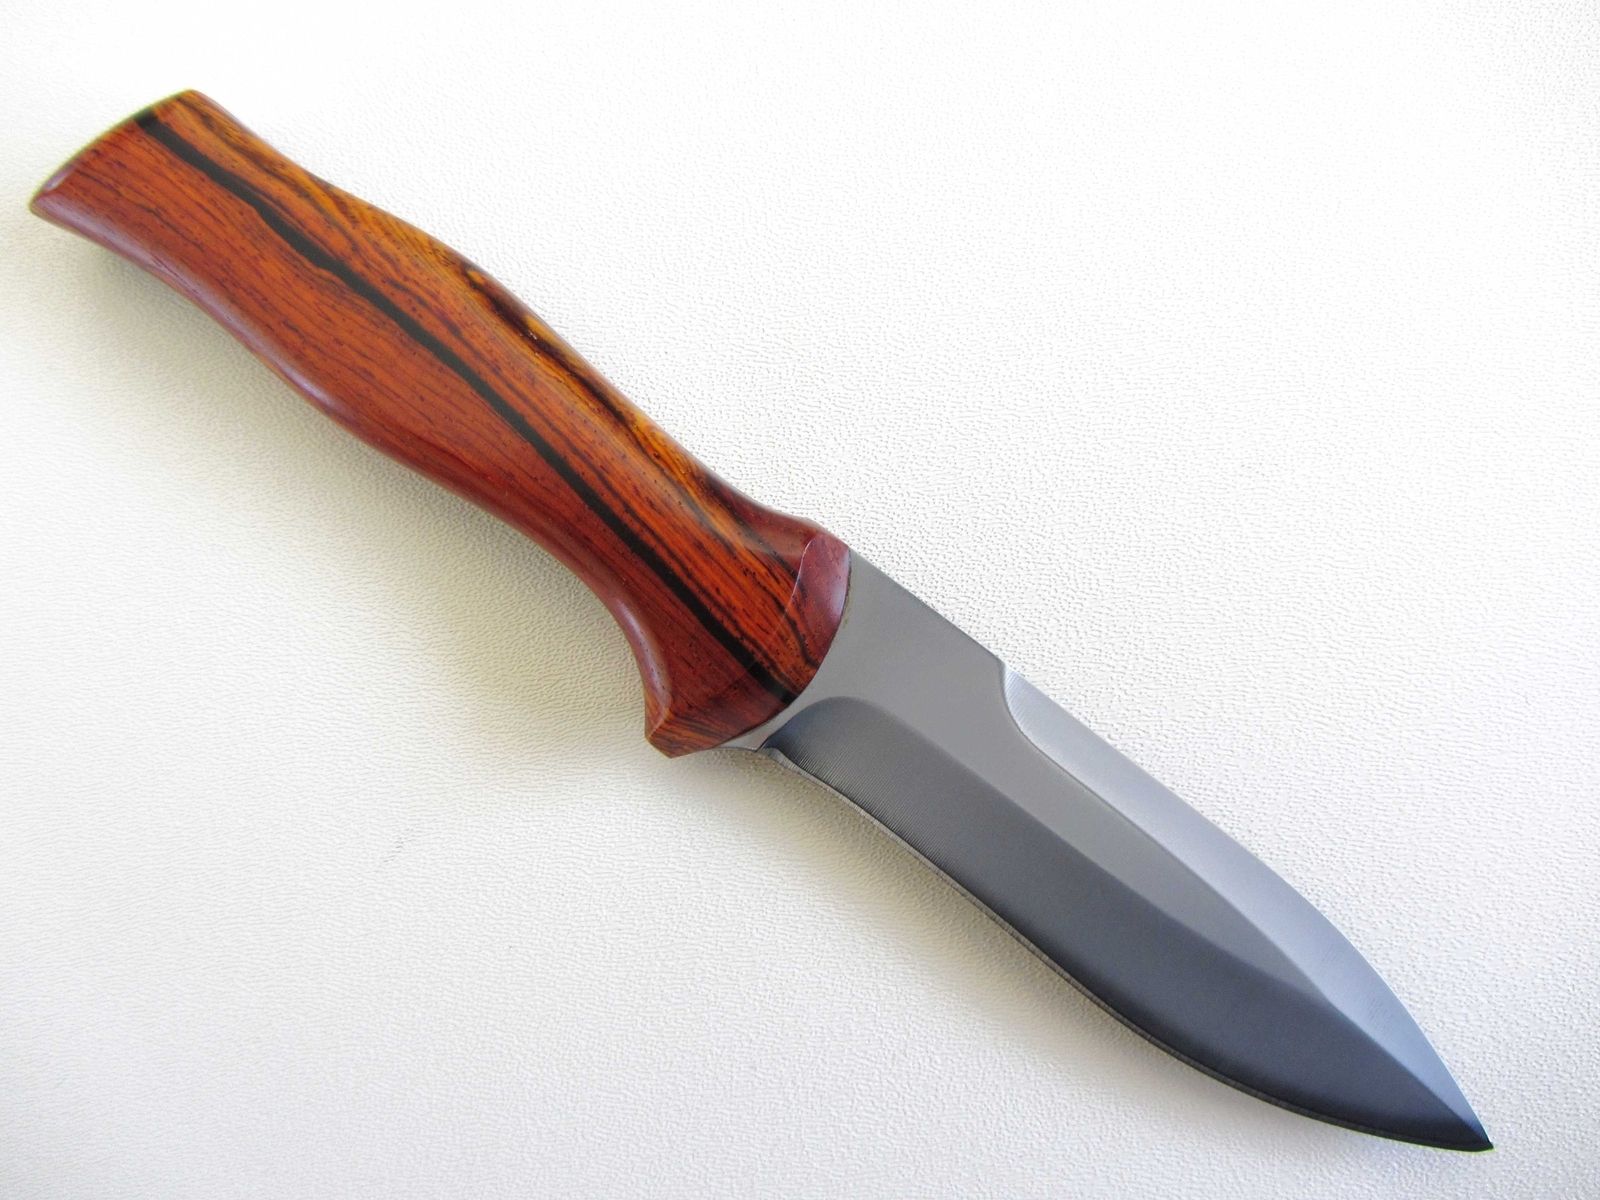 Woodworking knife handle Main Image